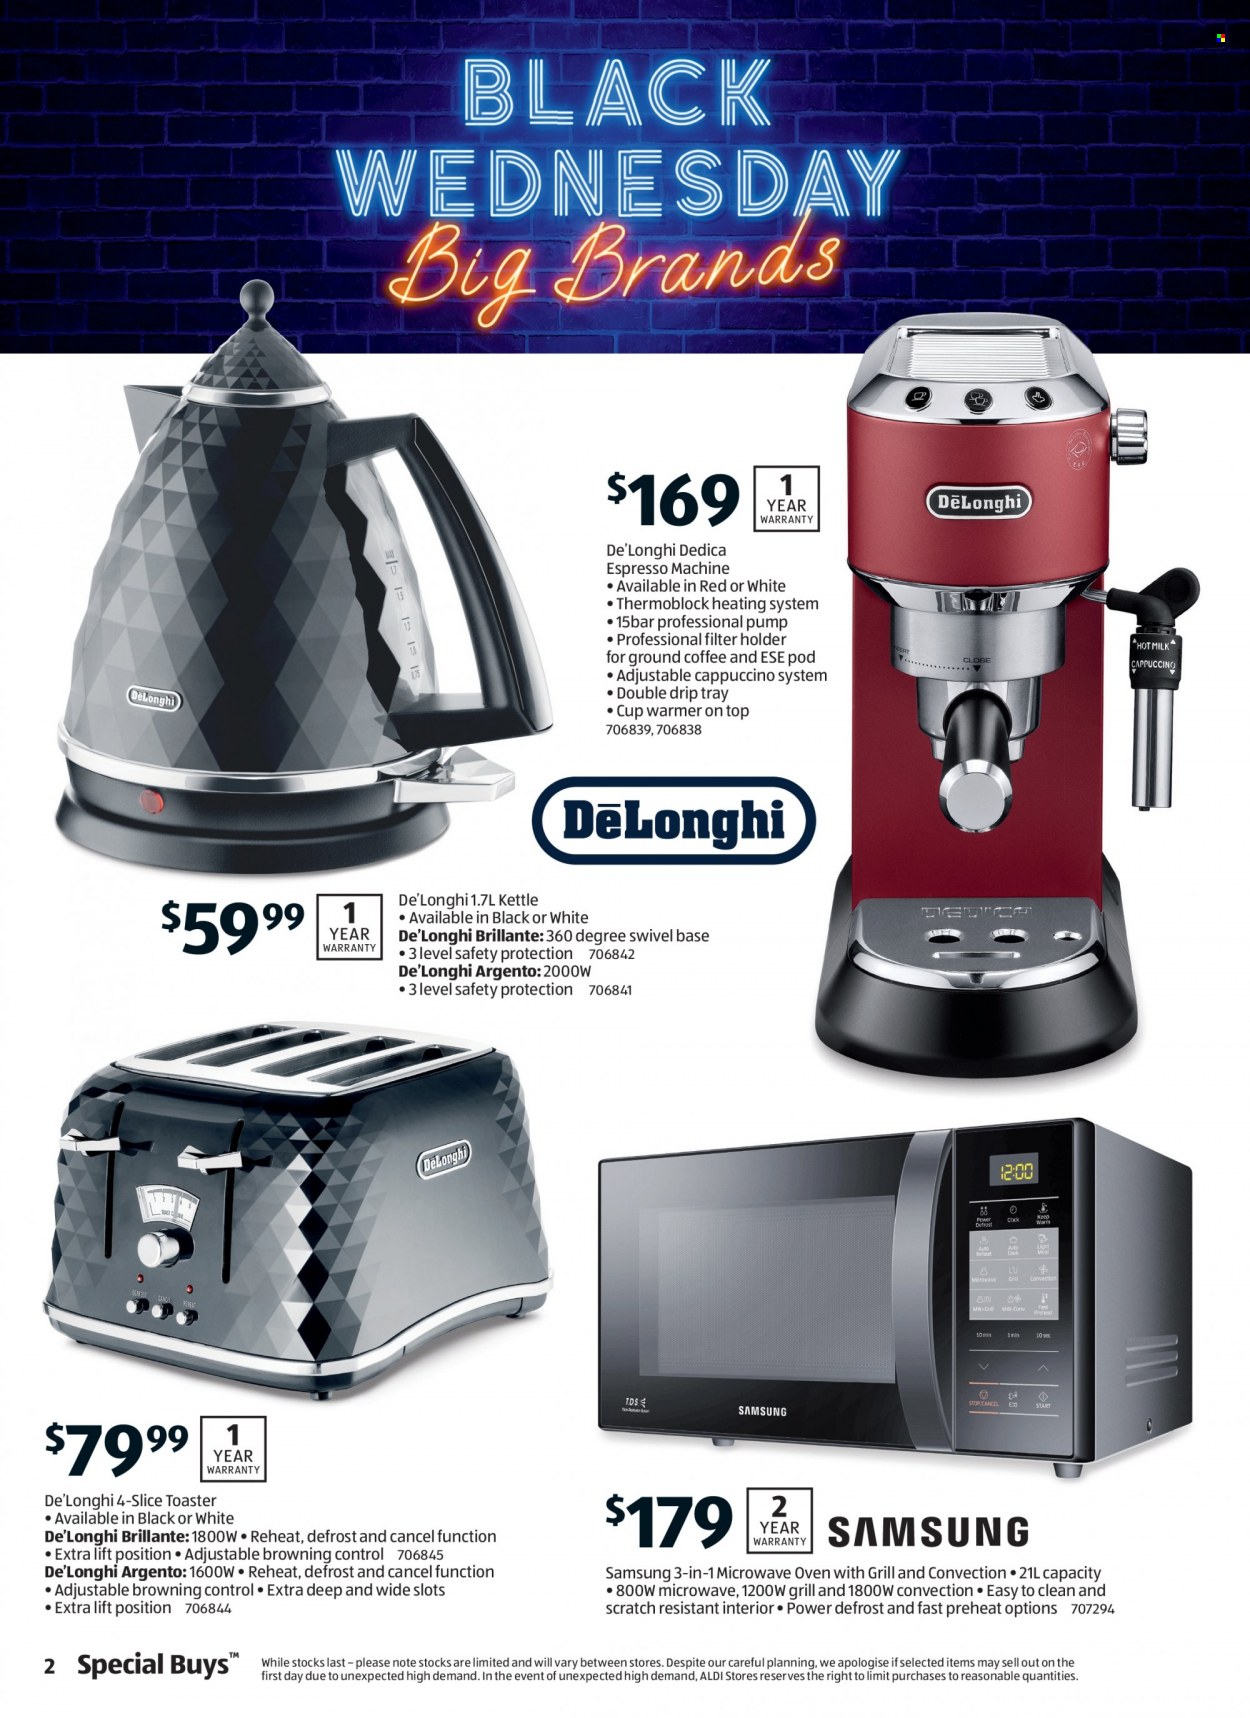 thumbnail - ALDI Catalogue - 24 Nov 2021 - 30 Nov 2021 - Sales products - kettle, cappuccino, coffee, ground coffee, cup, Samsung, coffee machine, De'Longhi, espresso maker, toaster, Browning. Page 2.